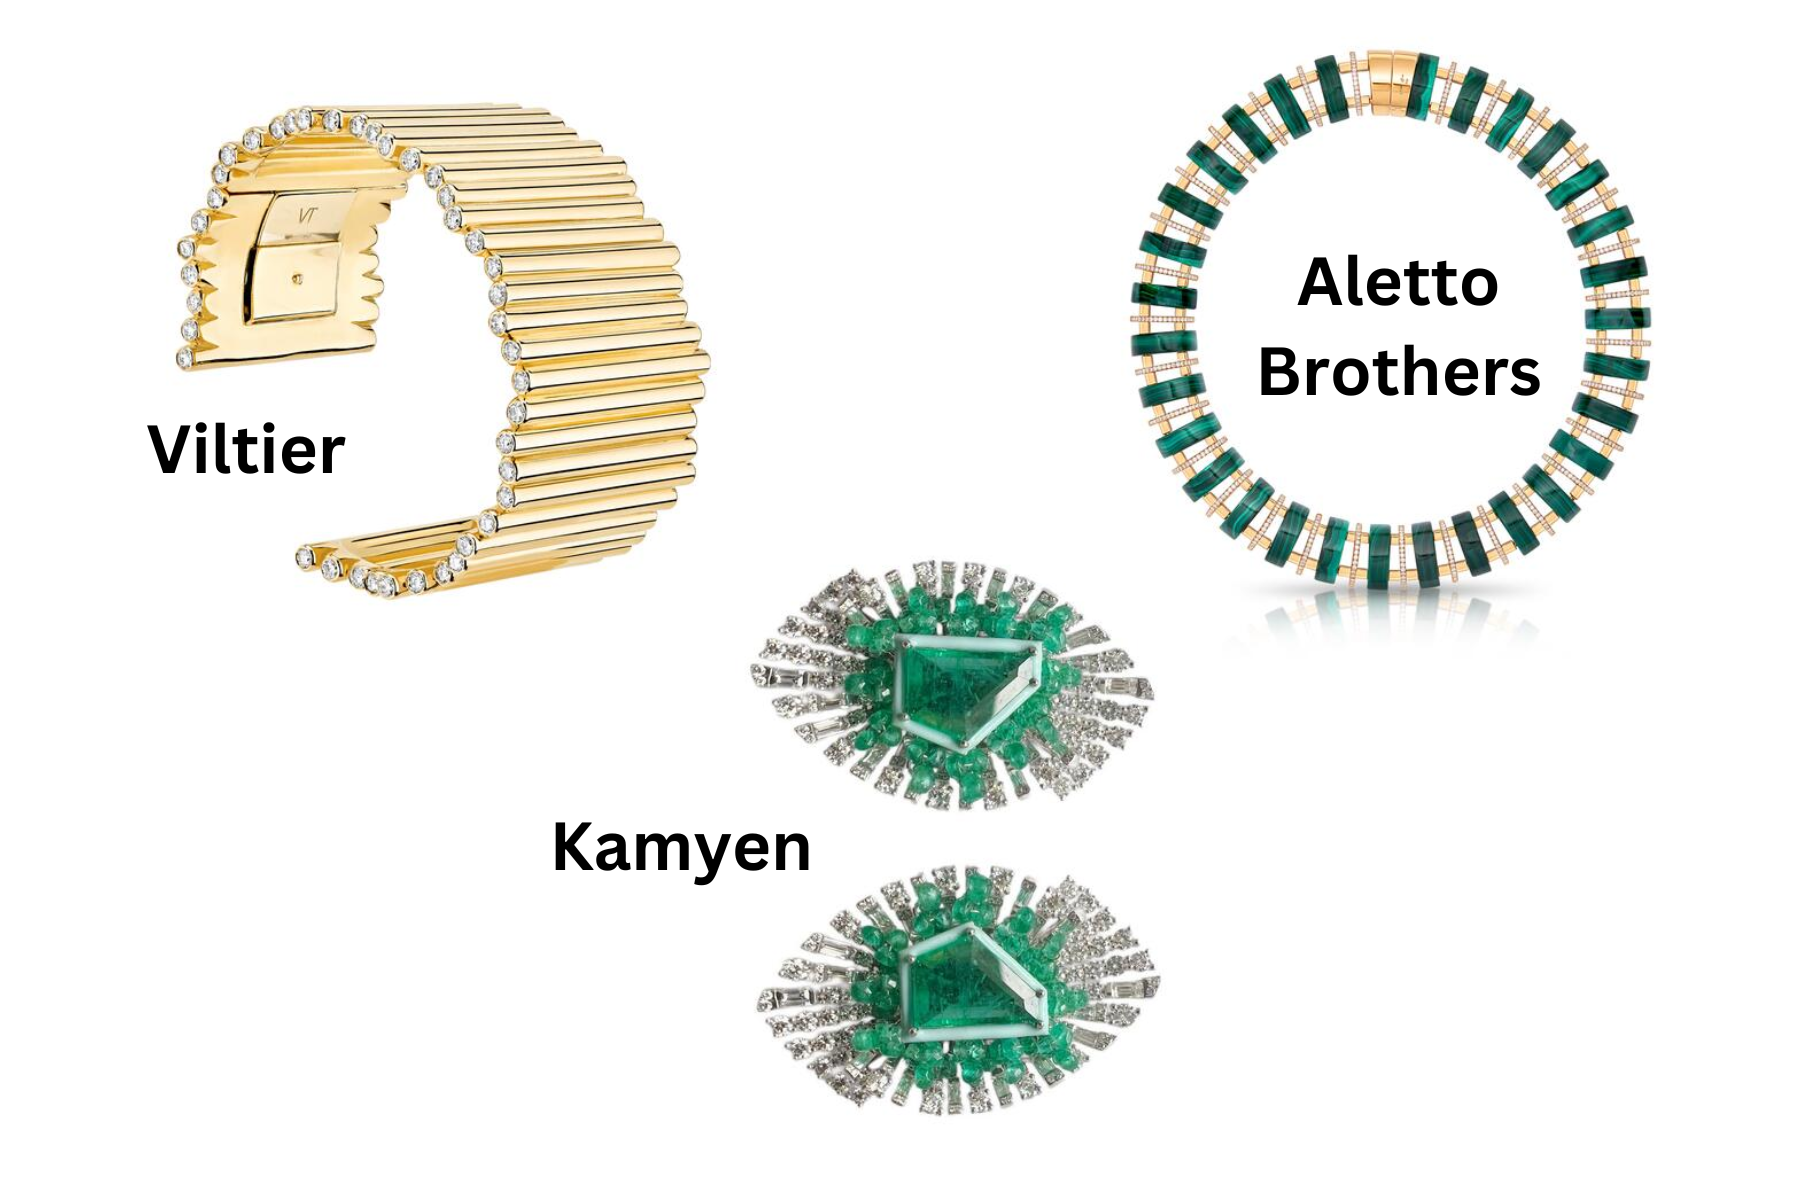 Viltier, Aletto Brothers and Kamyen jewelry